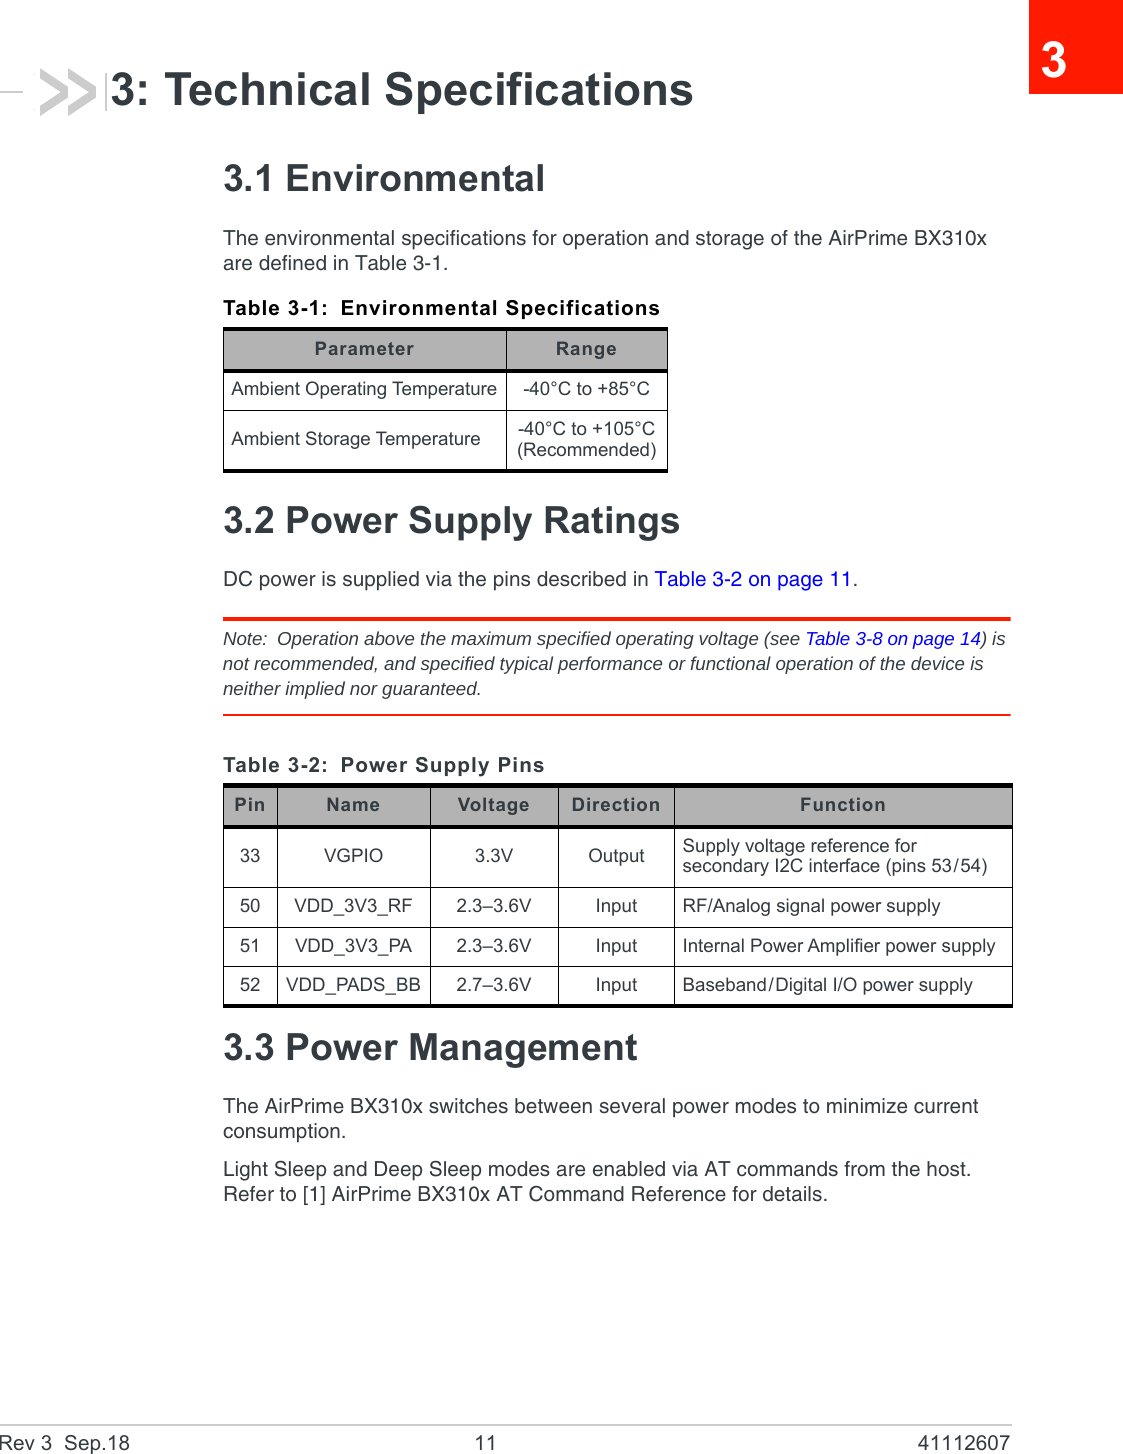 Rev 3  Sep.18 11 4111260733: Technical Specifications3.1 EnvironmentalThe environmental specifications for operation and storage of the AirPrime BX310x are defined in Table 3-1.3.2 Power Supply RatingsDC power is supplied via the pins described in Table 3-2 on page 11.Note: Operation above the maximum specified operating voltage (see Table 3-8 on page 14) is not recommended, and specified typical performance or functional operation of the device is neither implied nor guaranteed.3.3 Power ManagementThe AirPrime BX310x switches between several power modes to minimize current consumption.Light Sleep and Deep Sleep modes are enabled via AT commands from the host. Refer to [1] AirPrime BX310x AT Command Reference for details.Table 3-1: Environmental SpecificationsParameter RangeAmbient Operating Temperature -40°C to +85°CAmbient Storage Temperature -40°C to +105°C(Recommended)Table 3-2: Power Supply PinsPin Name Voltage Direction Function33 VGPIO 3.3V Output Supply voltage reference for secondary I2C interface (pins 53/54)50 VDD_3V3_RF 2.3–3.6V Input RF/Analog signal power supply51 VDD_3V3_PA 2.3–3.6V Input Internal Power Amplifier power supply52 VDD_PADS_BB 2.7–3.6V Input Baseband/Digital I/O power supply 